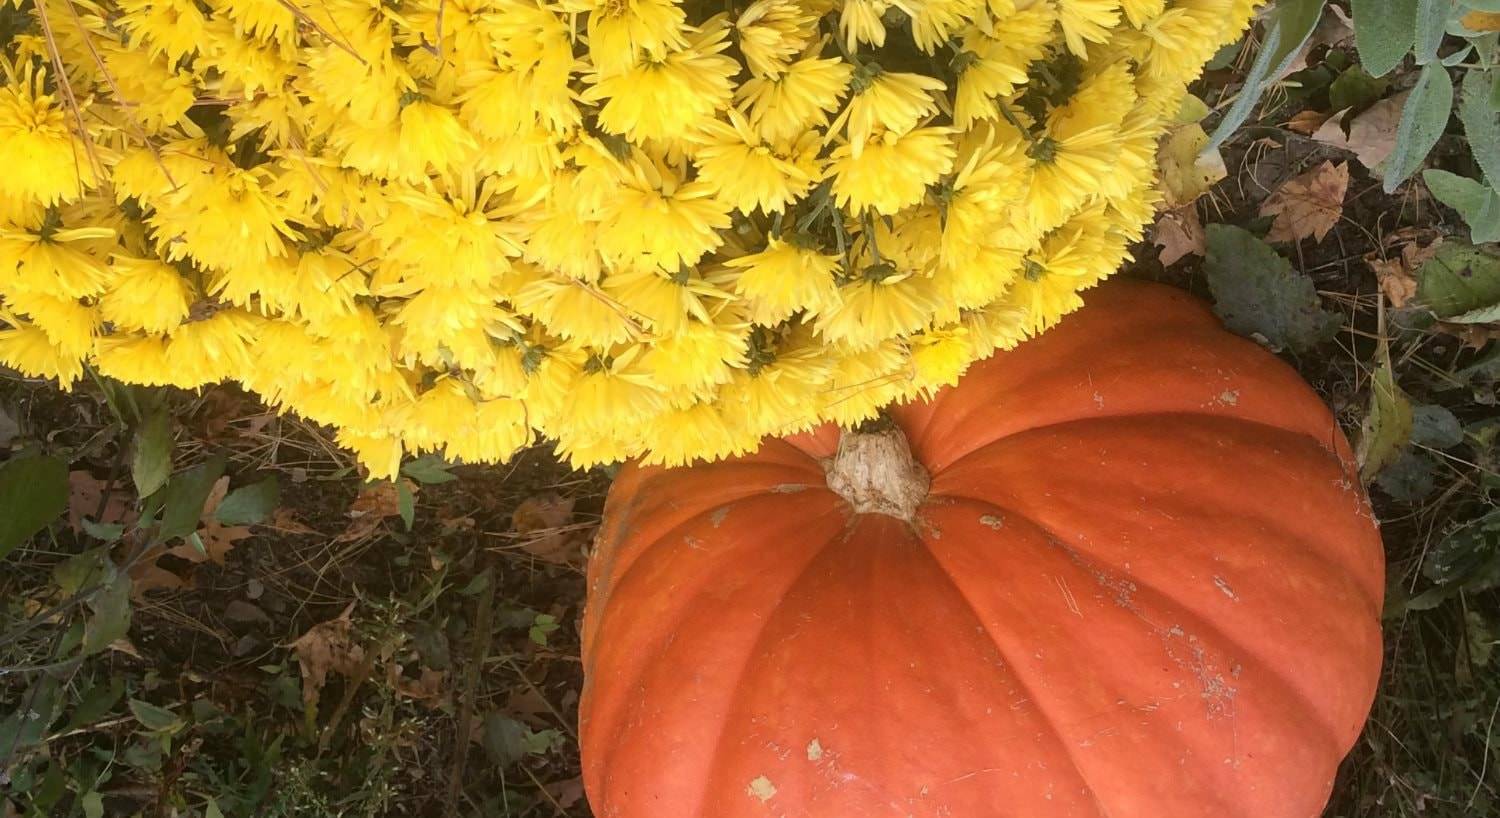 Close up view of yellow flowering mums on the ground next to a large orange pumpkin